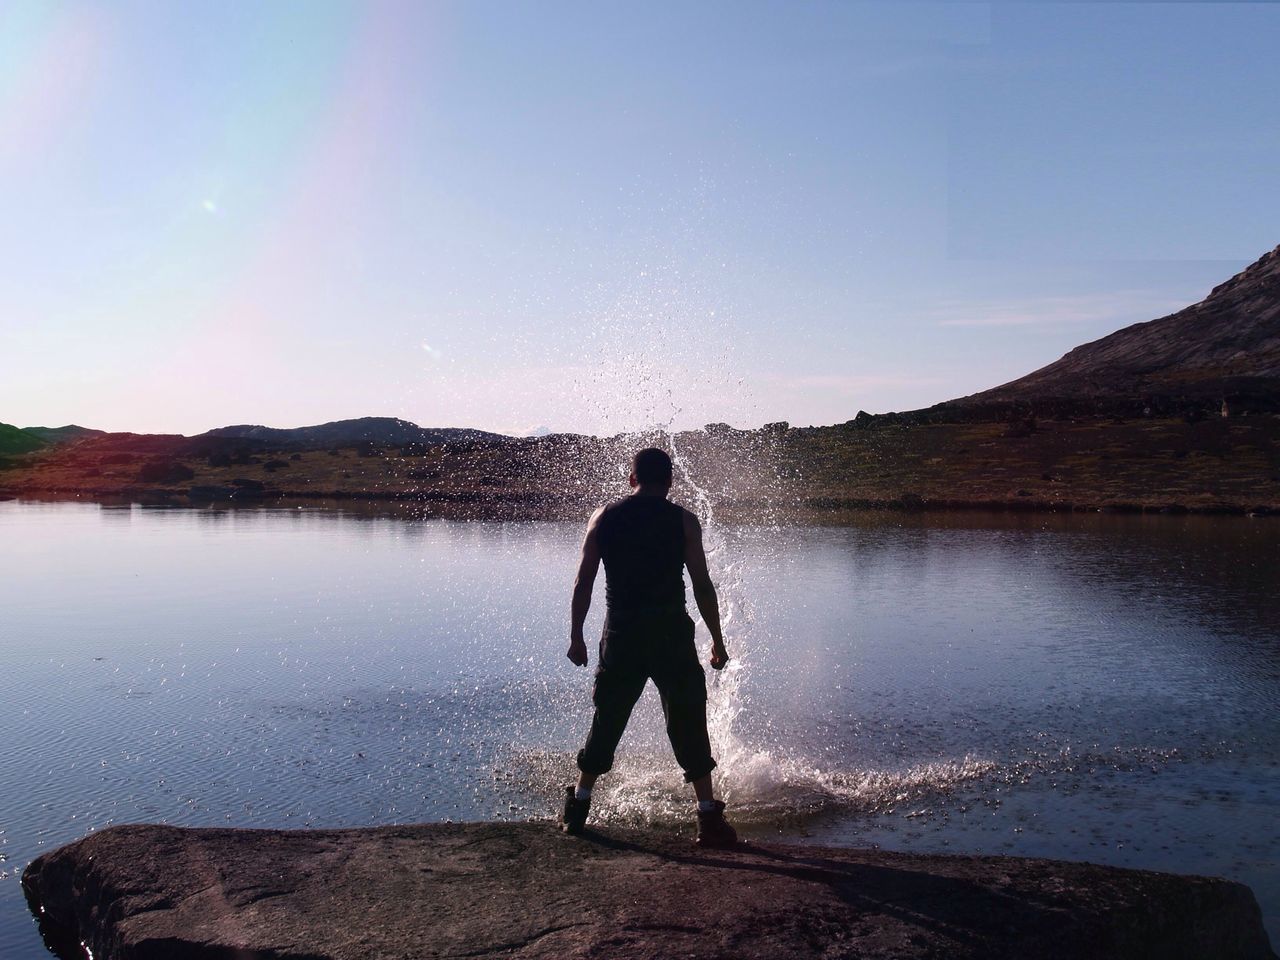 water, full length, rear view, lifestyles, leisure activity, standing, lake, reflection, tranquil scene, tranquility, sky, scenics, casual clothing, beauty in nature, nature, men, mountain, getting away from it all